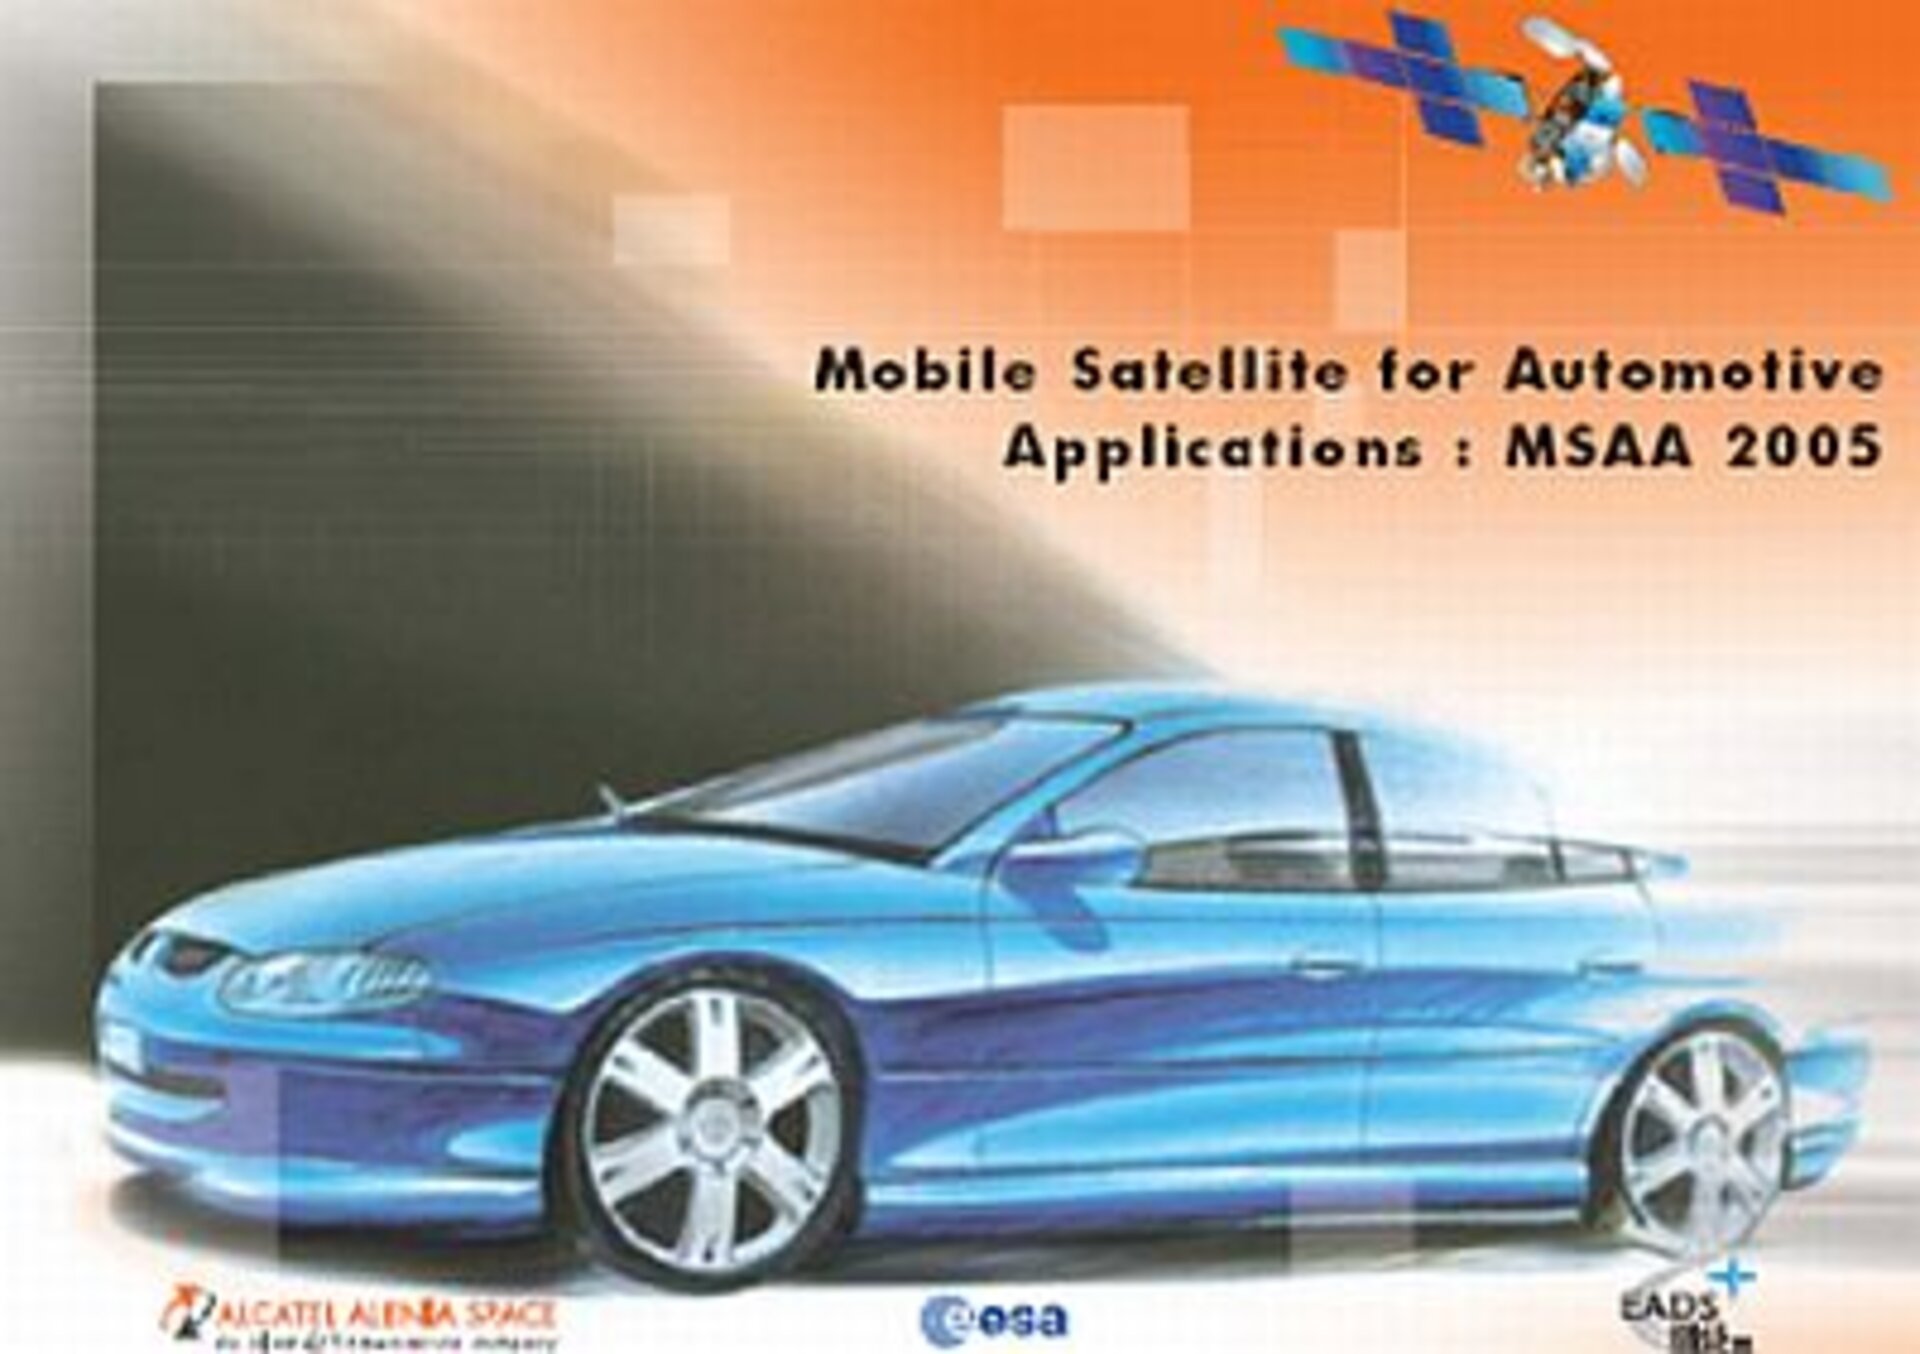 Mobile satellite for Automotive Applications (MSAA)